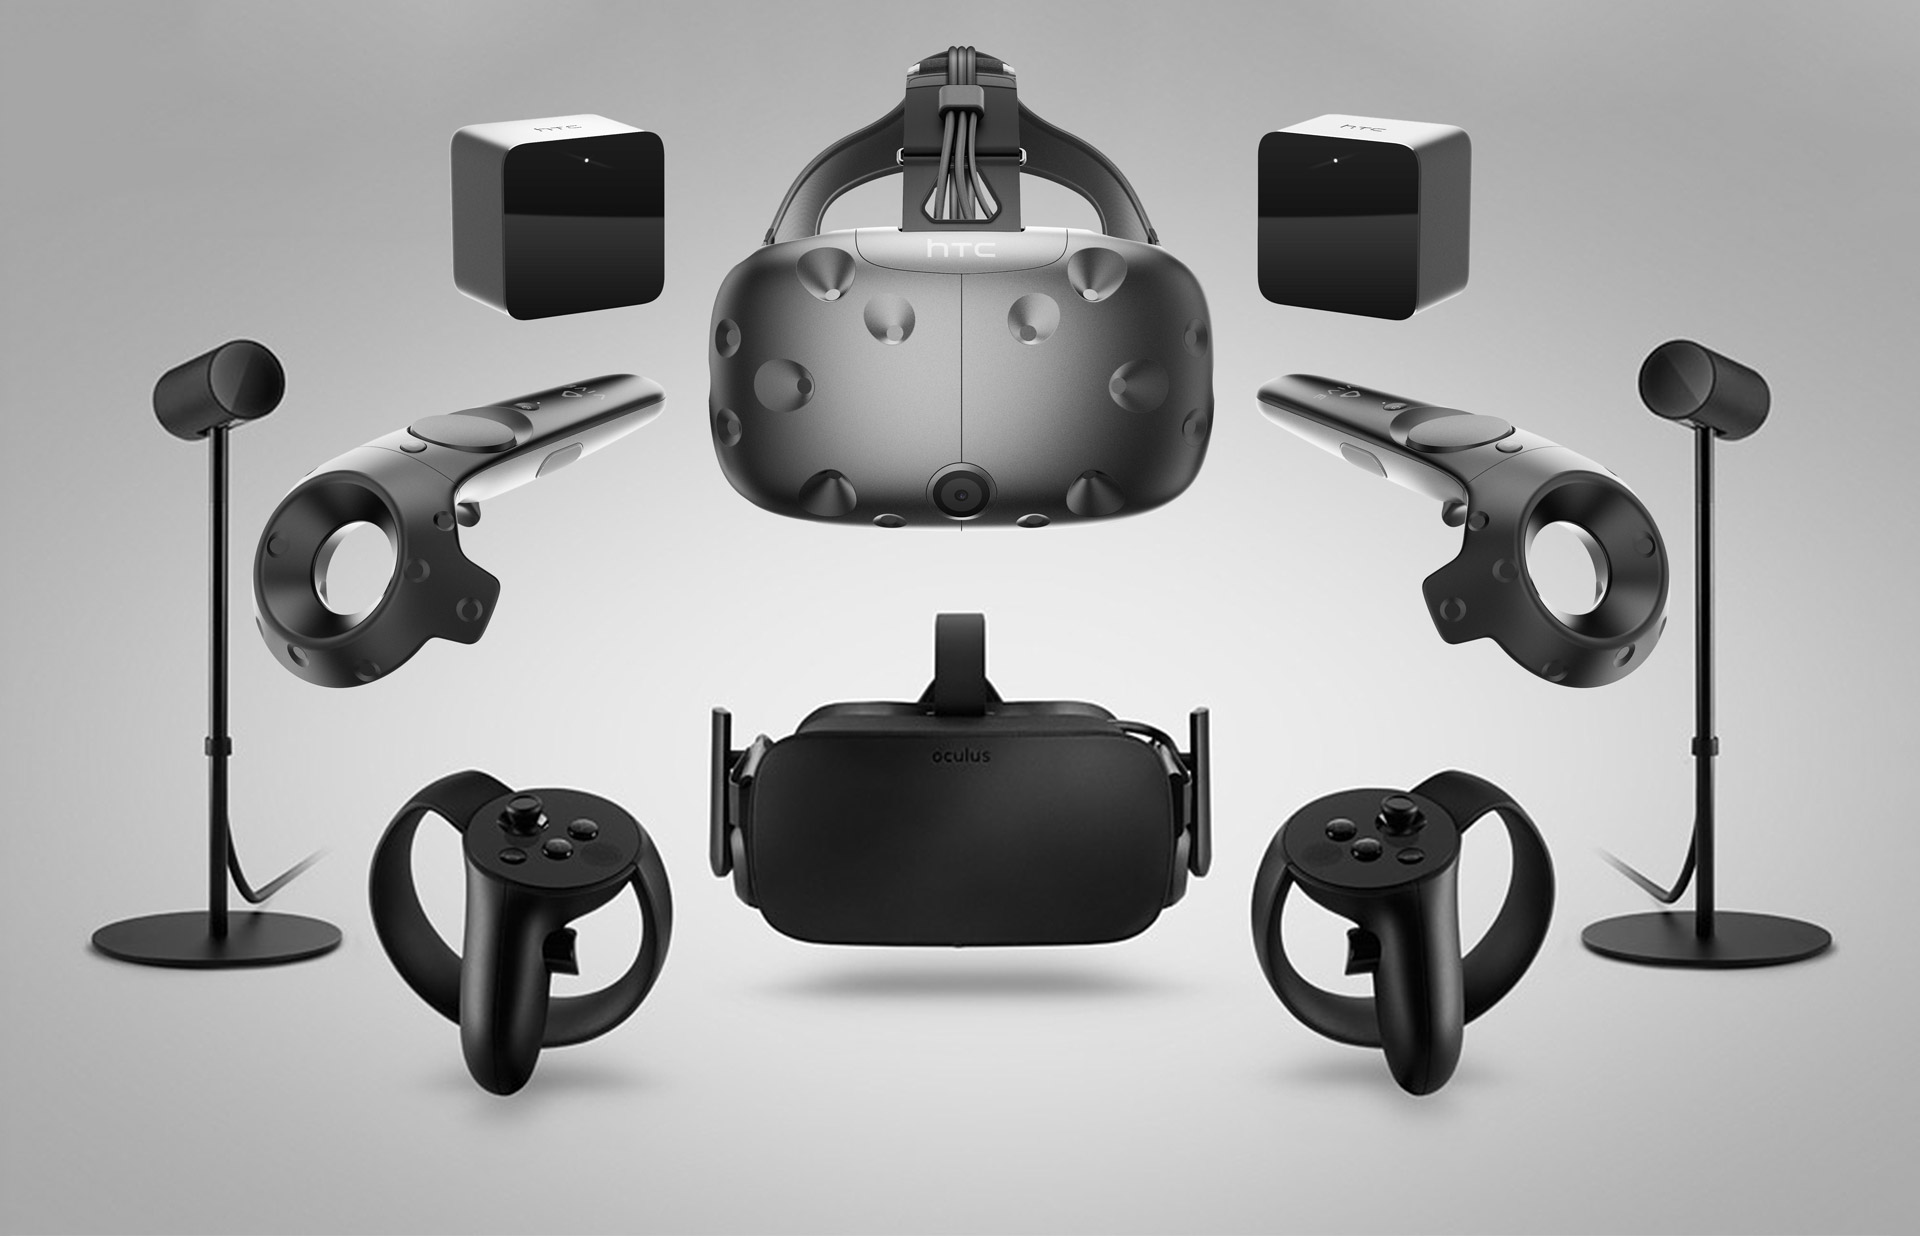 rift controllers with vive